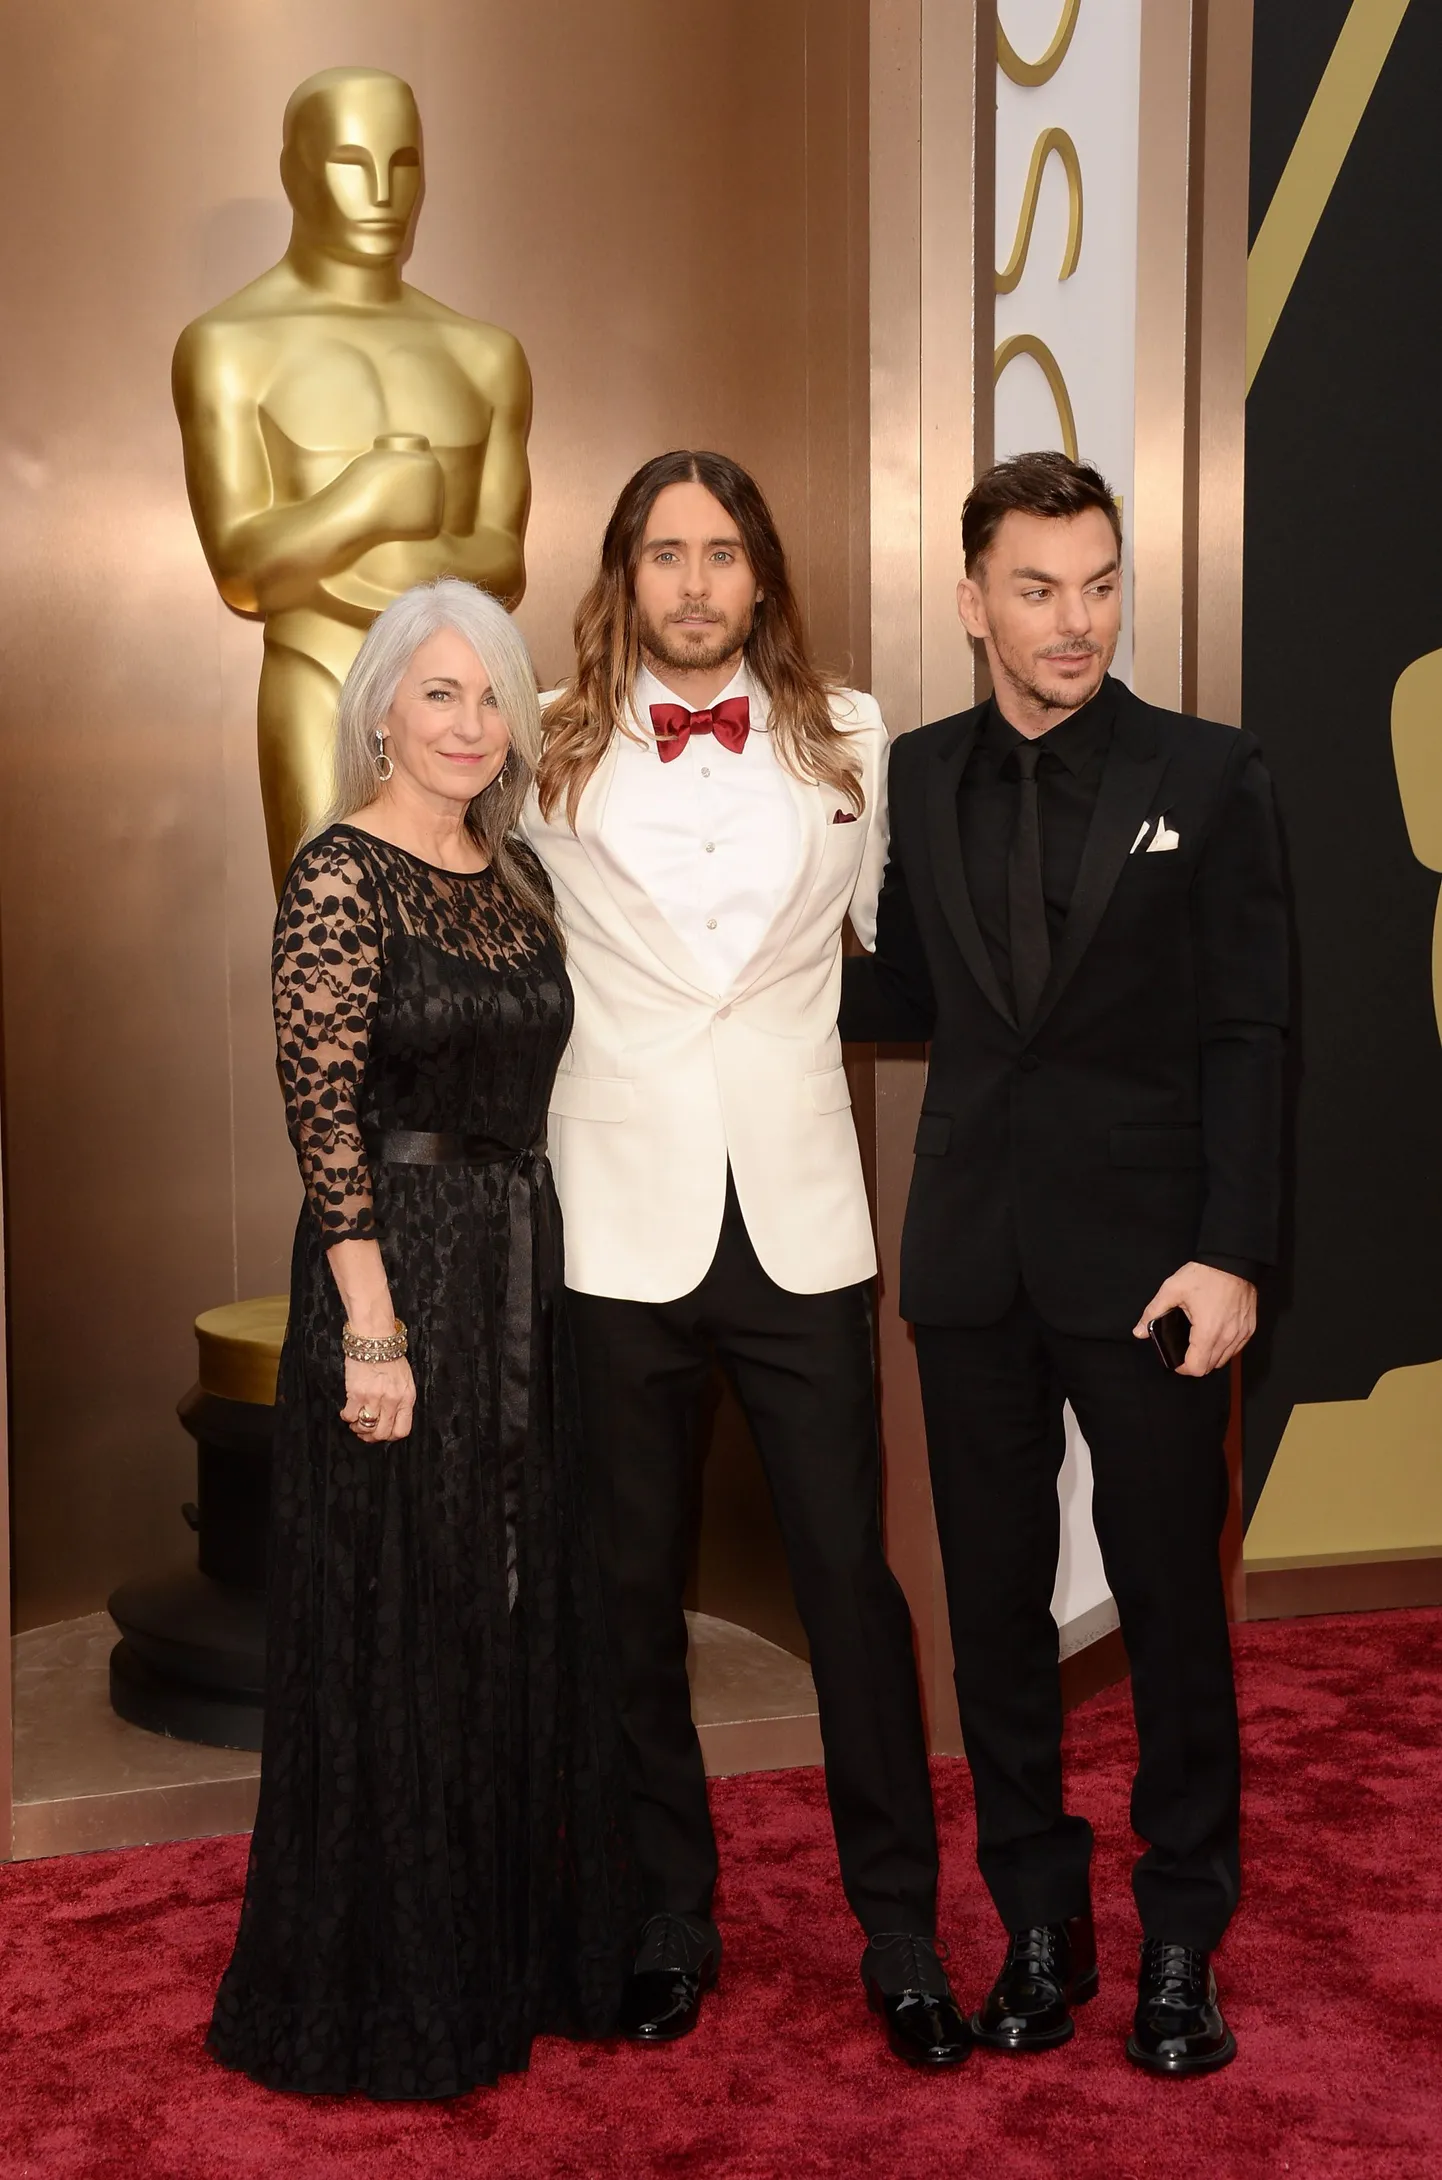 (L-R) Constance Leto, Jared Leto and Shannon Leto attend the Oscars held at Hollywood & Highland Center on March 2, 2014 in Hollywood, California.   Jason Merritt/Getty Images/AFP
== FOR NEWSPAPERS, INTERNET, TELCOS & TELEVISION USE ONLY ==